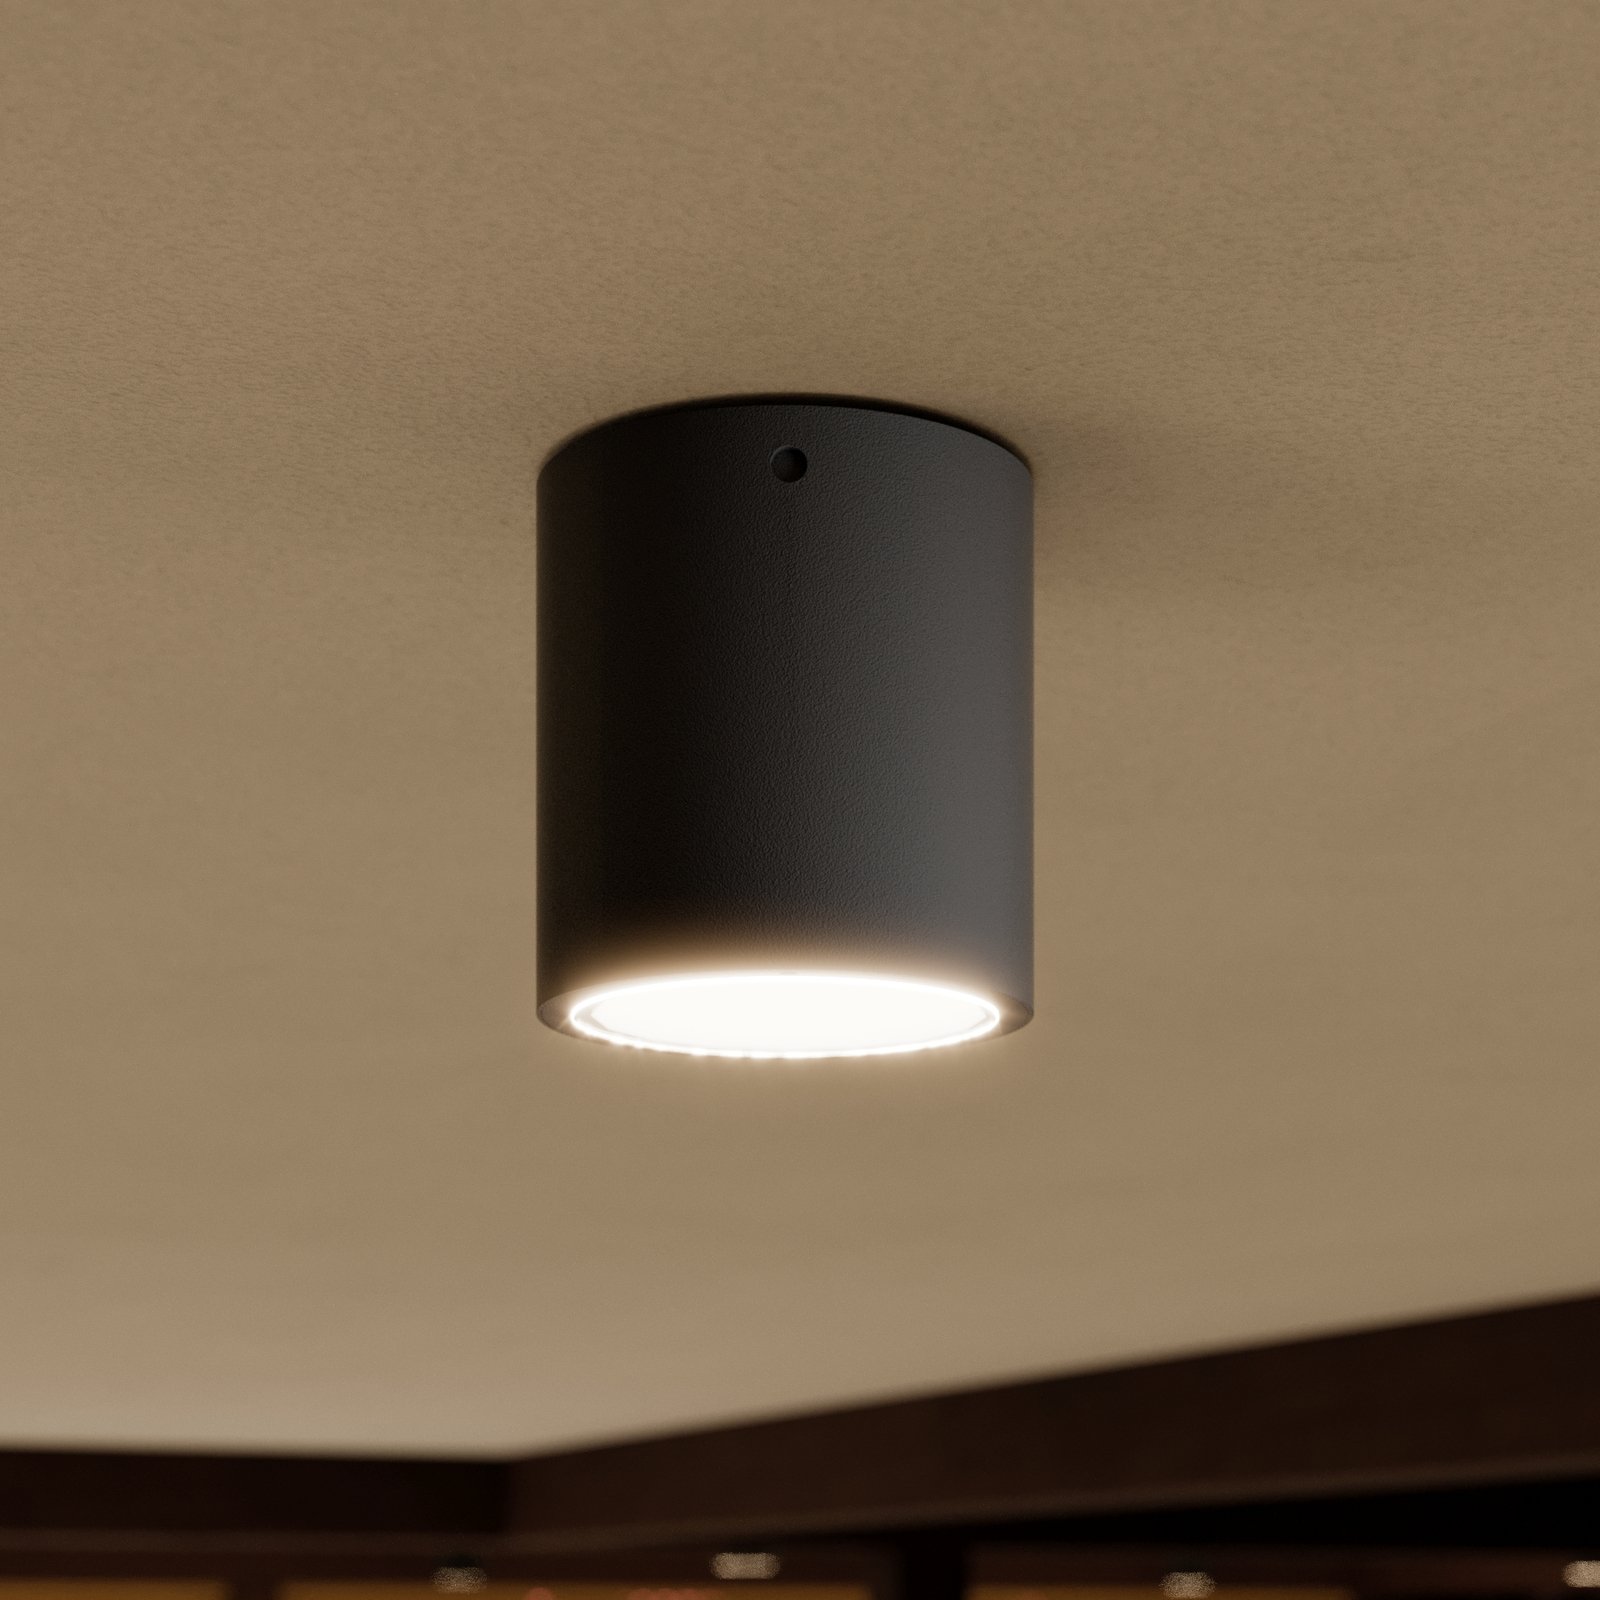 Round LED outdoor ceiling spotlight Meret, IP54